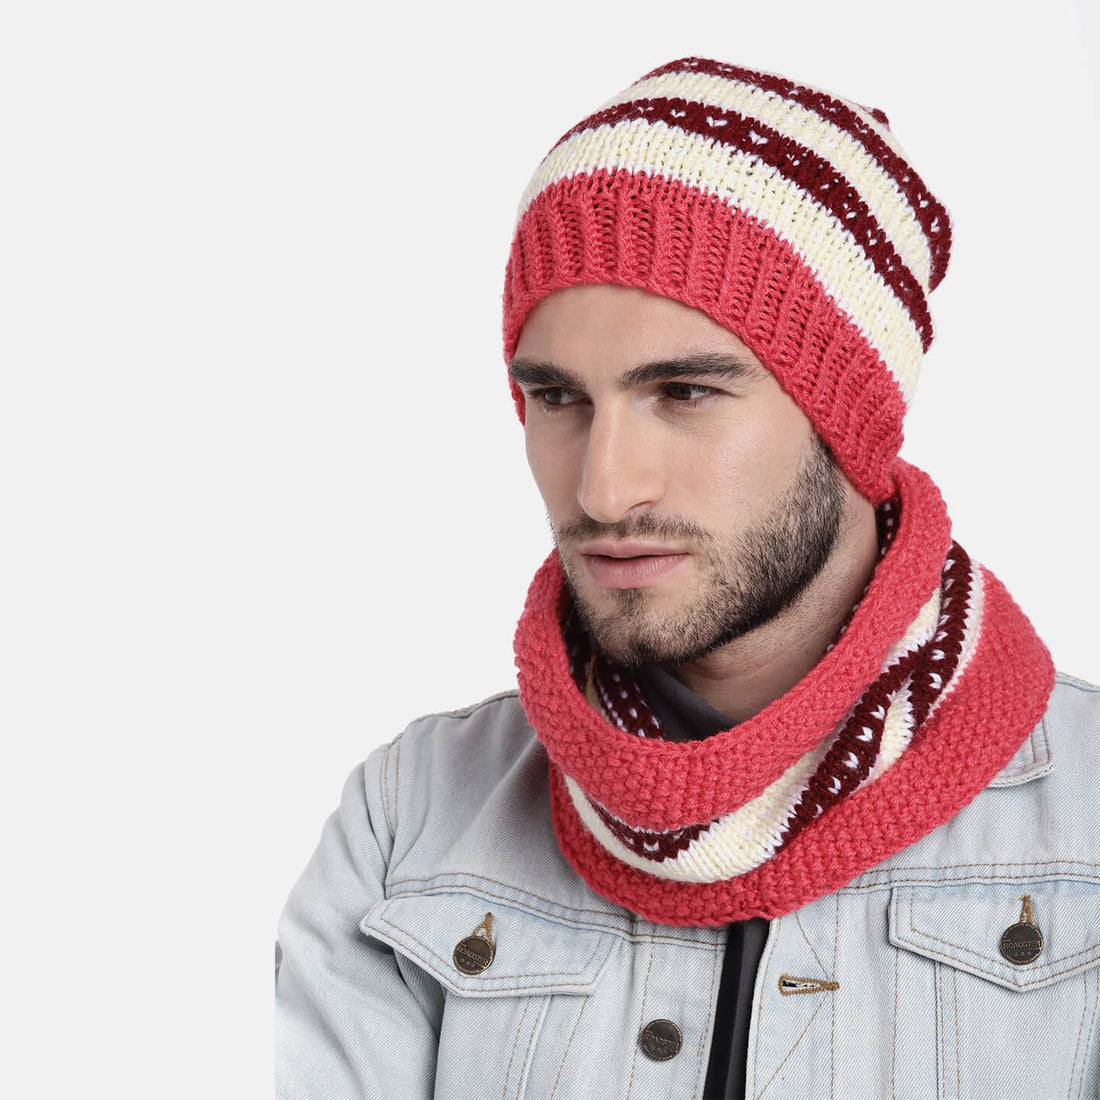 Double-Knit Cap and Neckwarmer Set - 2524